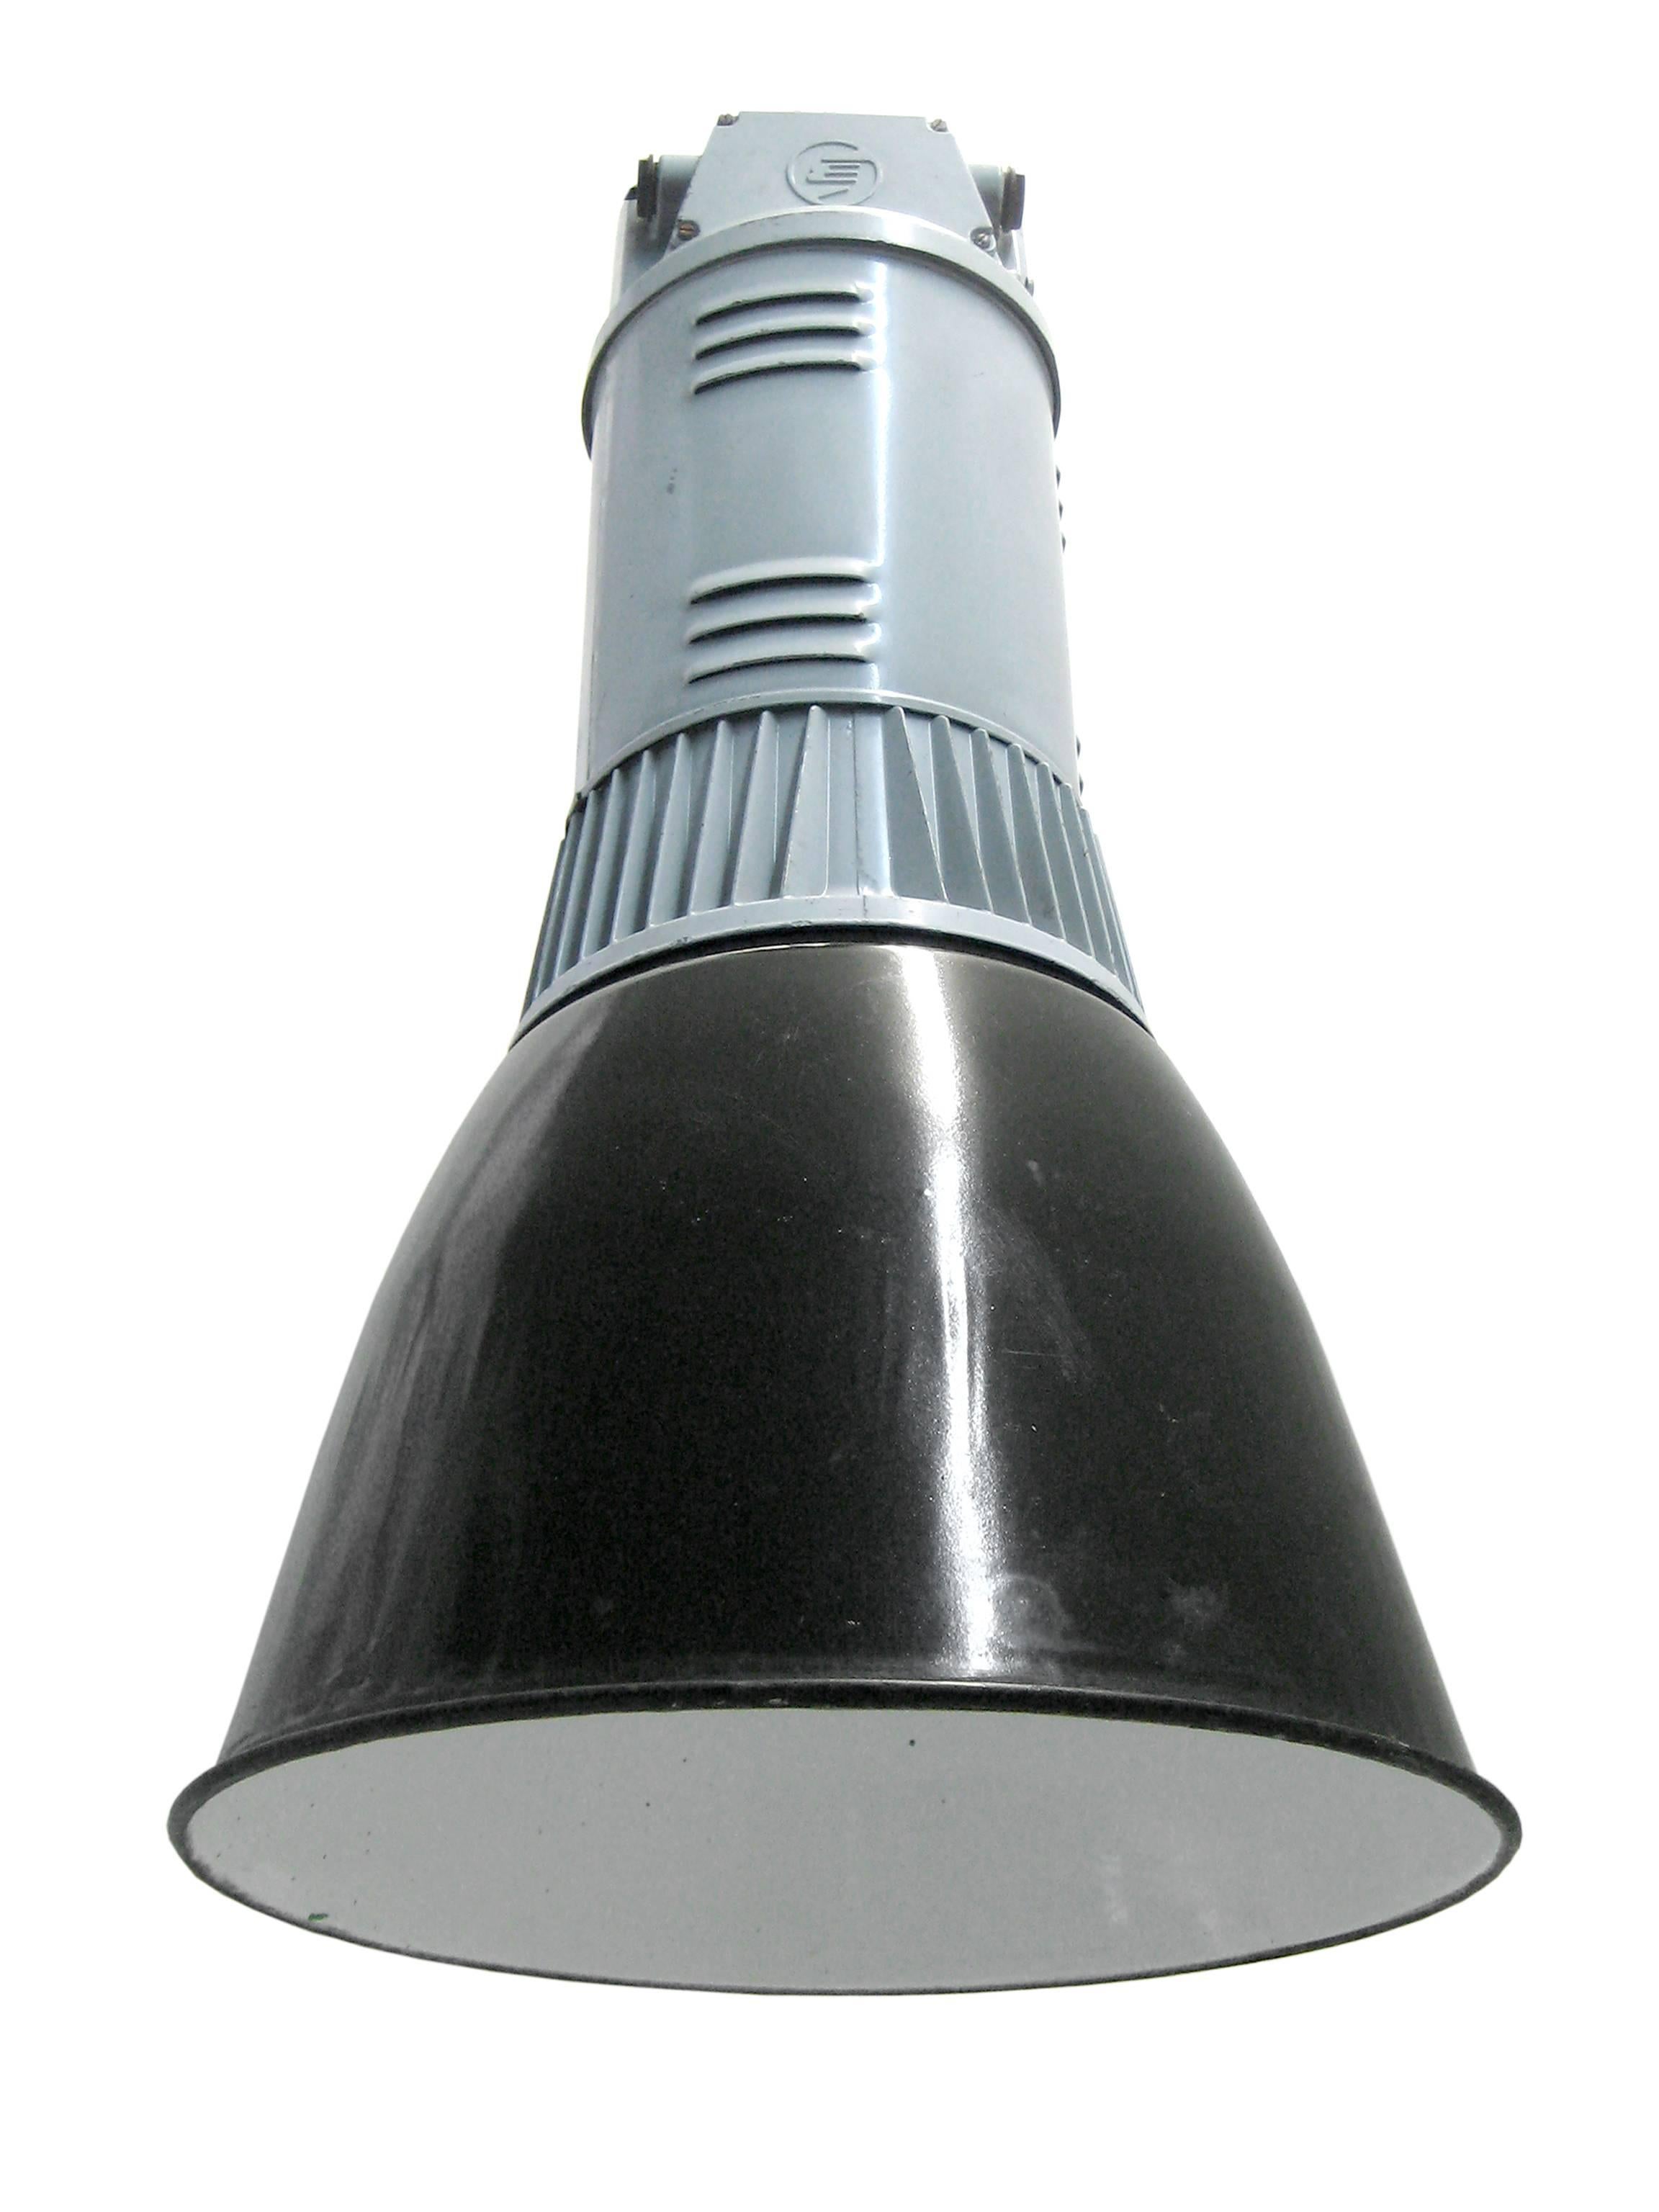 Industrial hanging lamp. Black enamel shade. Gray cast aluminium top.

Weight: 7.0 kg / 15.4 lb

Priced per individual item. All lamps have been made suitable by international standards for incandescent light bulbs, energy-efficient and LED bulbs.